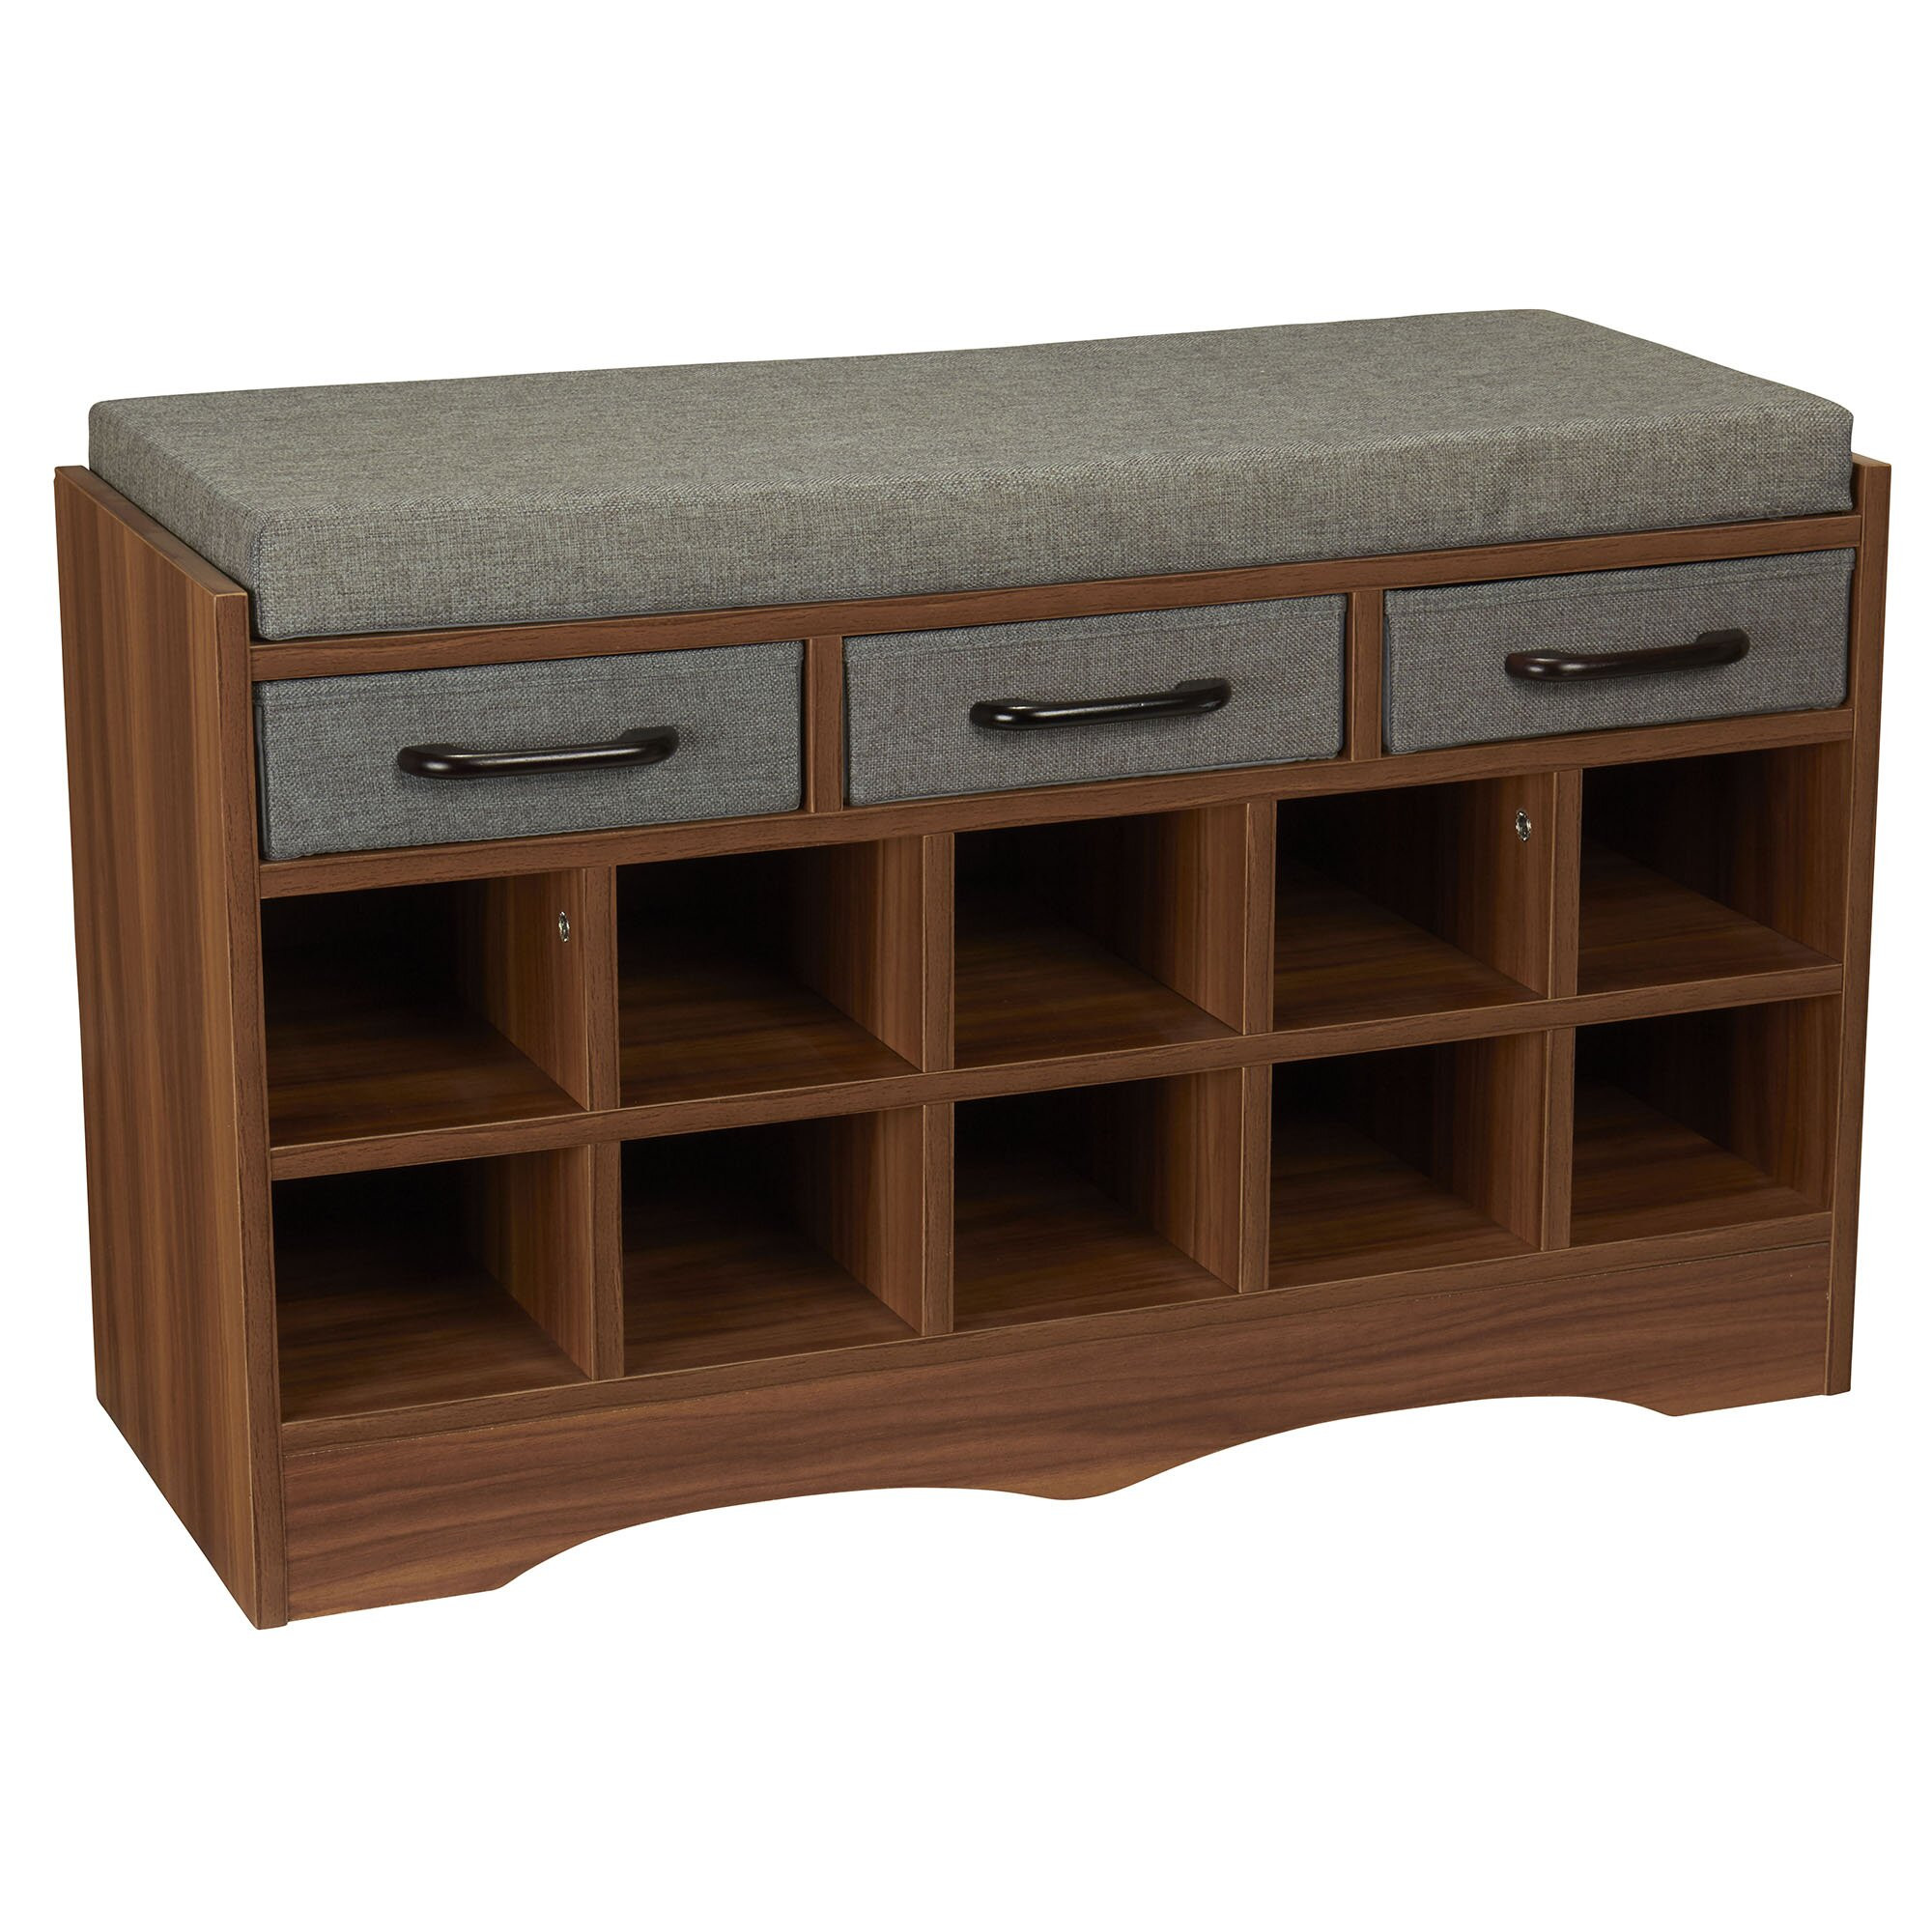 Entryway Bench With Shoe Storage
 Household Essentials Entryway Shoe Storage Bench & Reviews